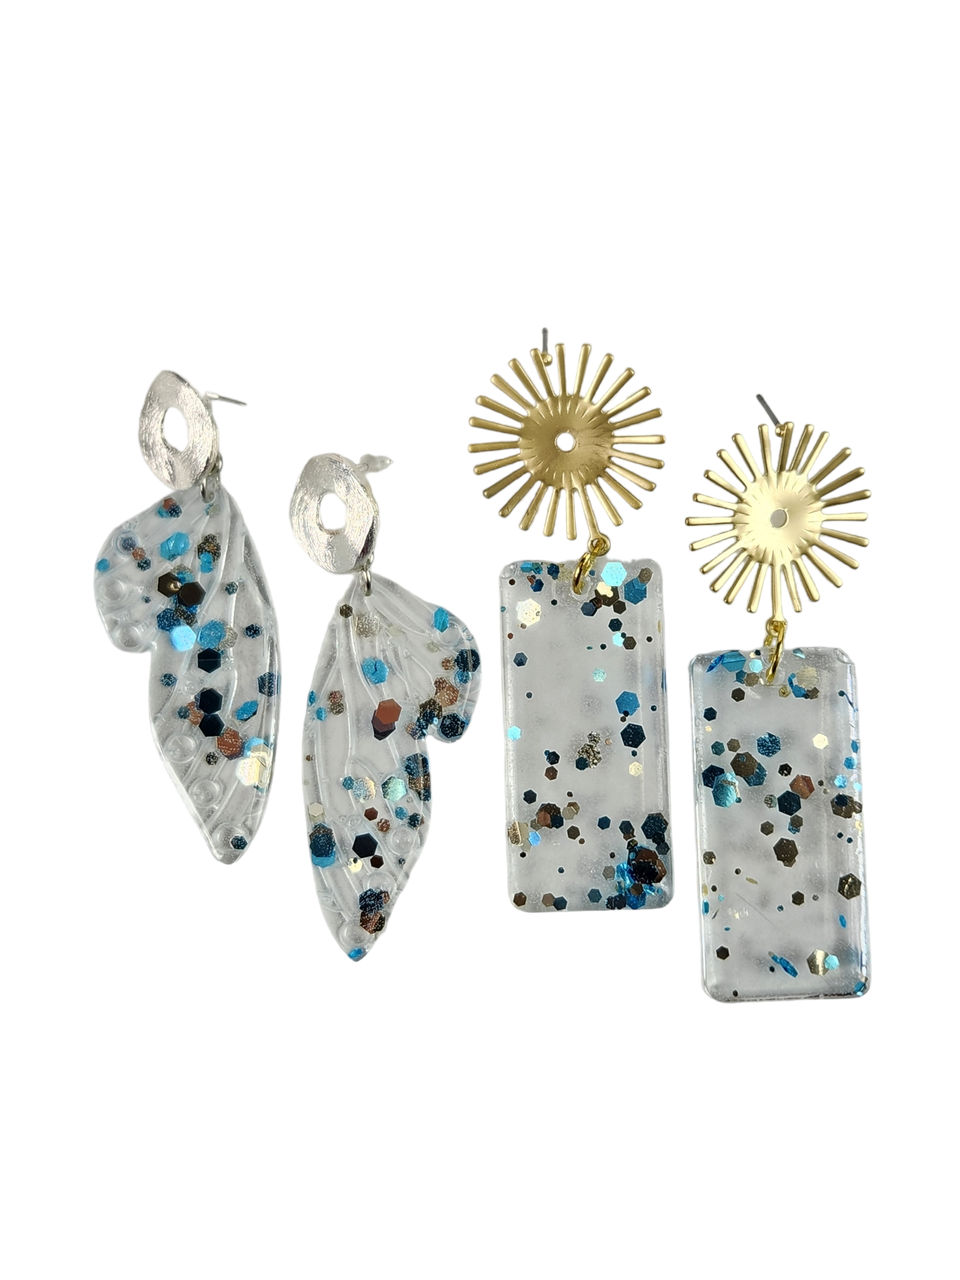 The Lucy Glitter Resin Earring Collection